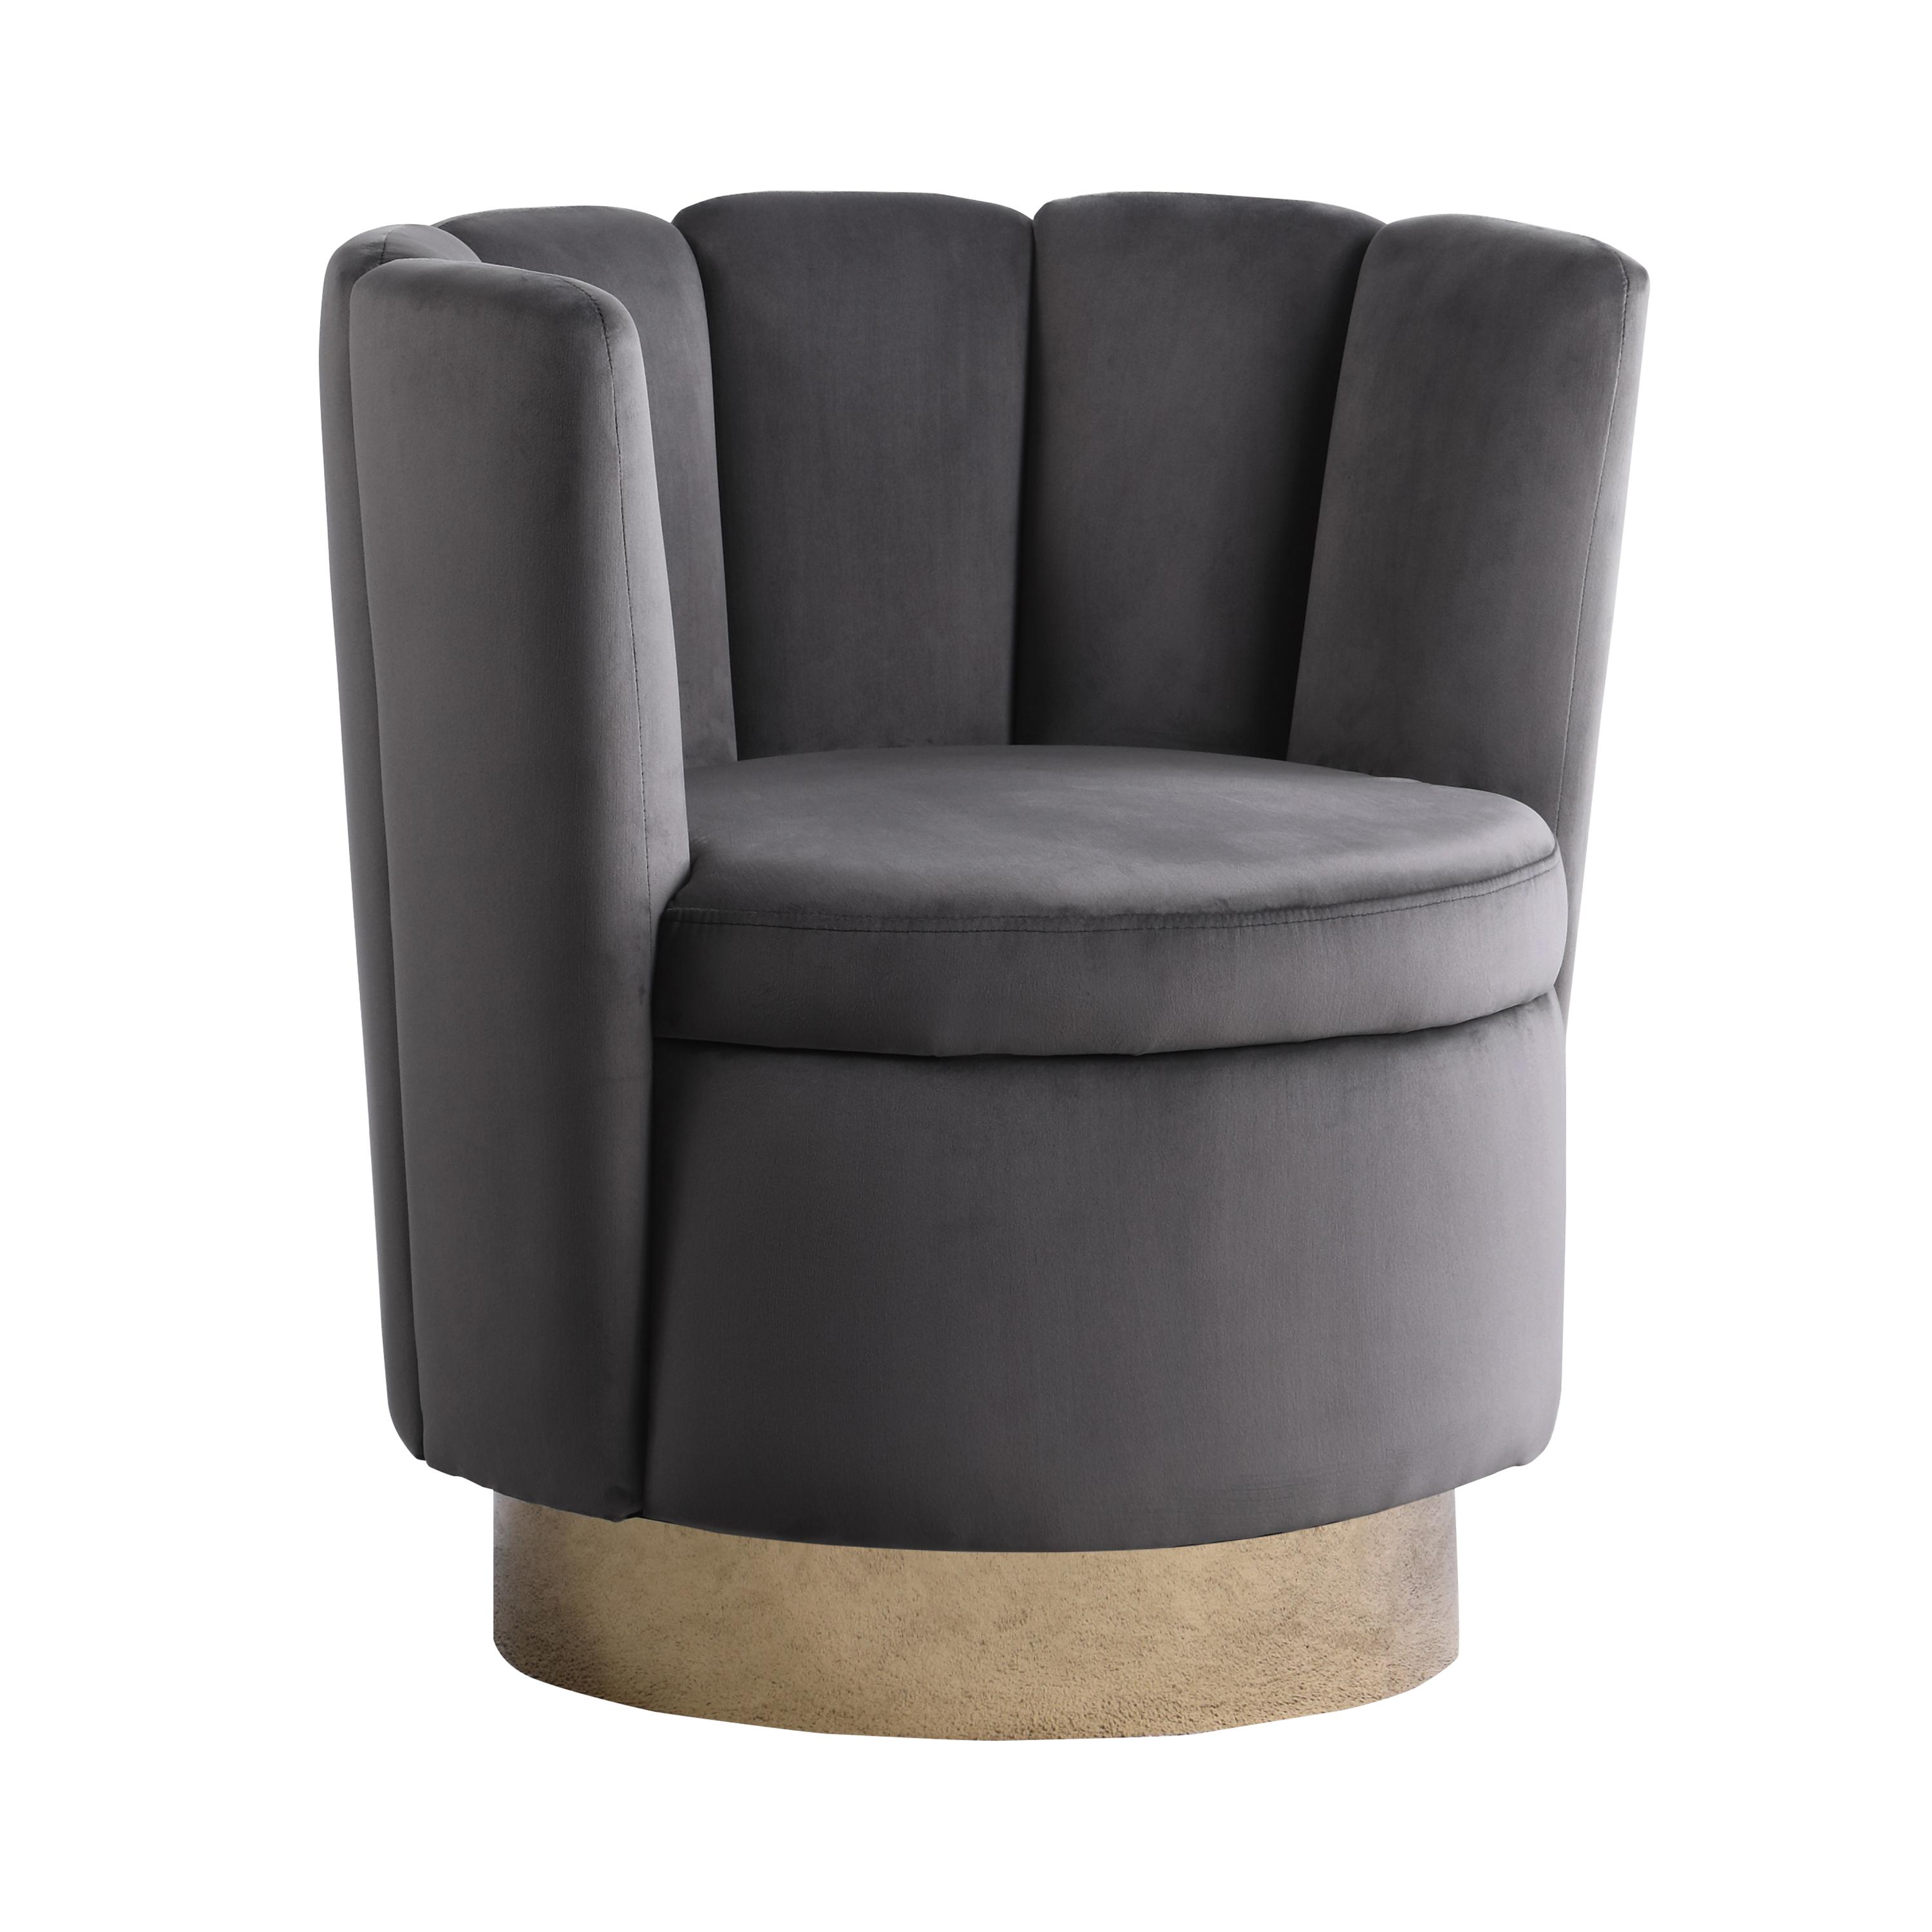 Contemporary Accent Chair 905649 905649 in Gray Velvet